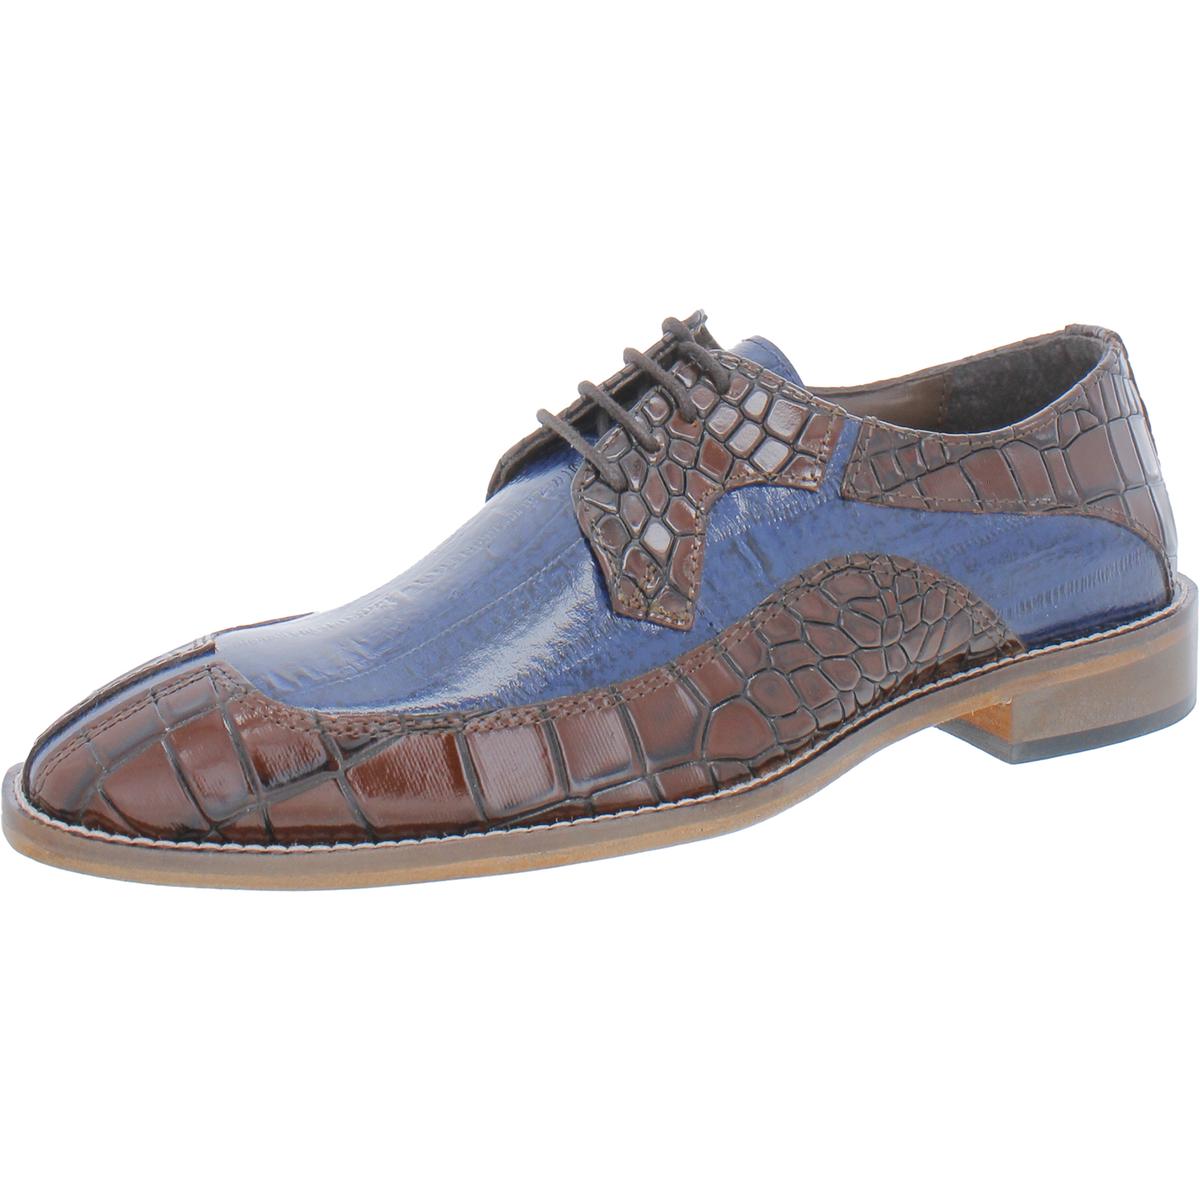 Stacy Adams Tiramico Mens Leather Croc Embossed Oxfords